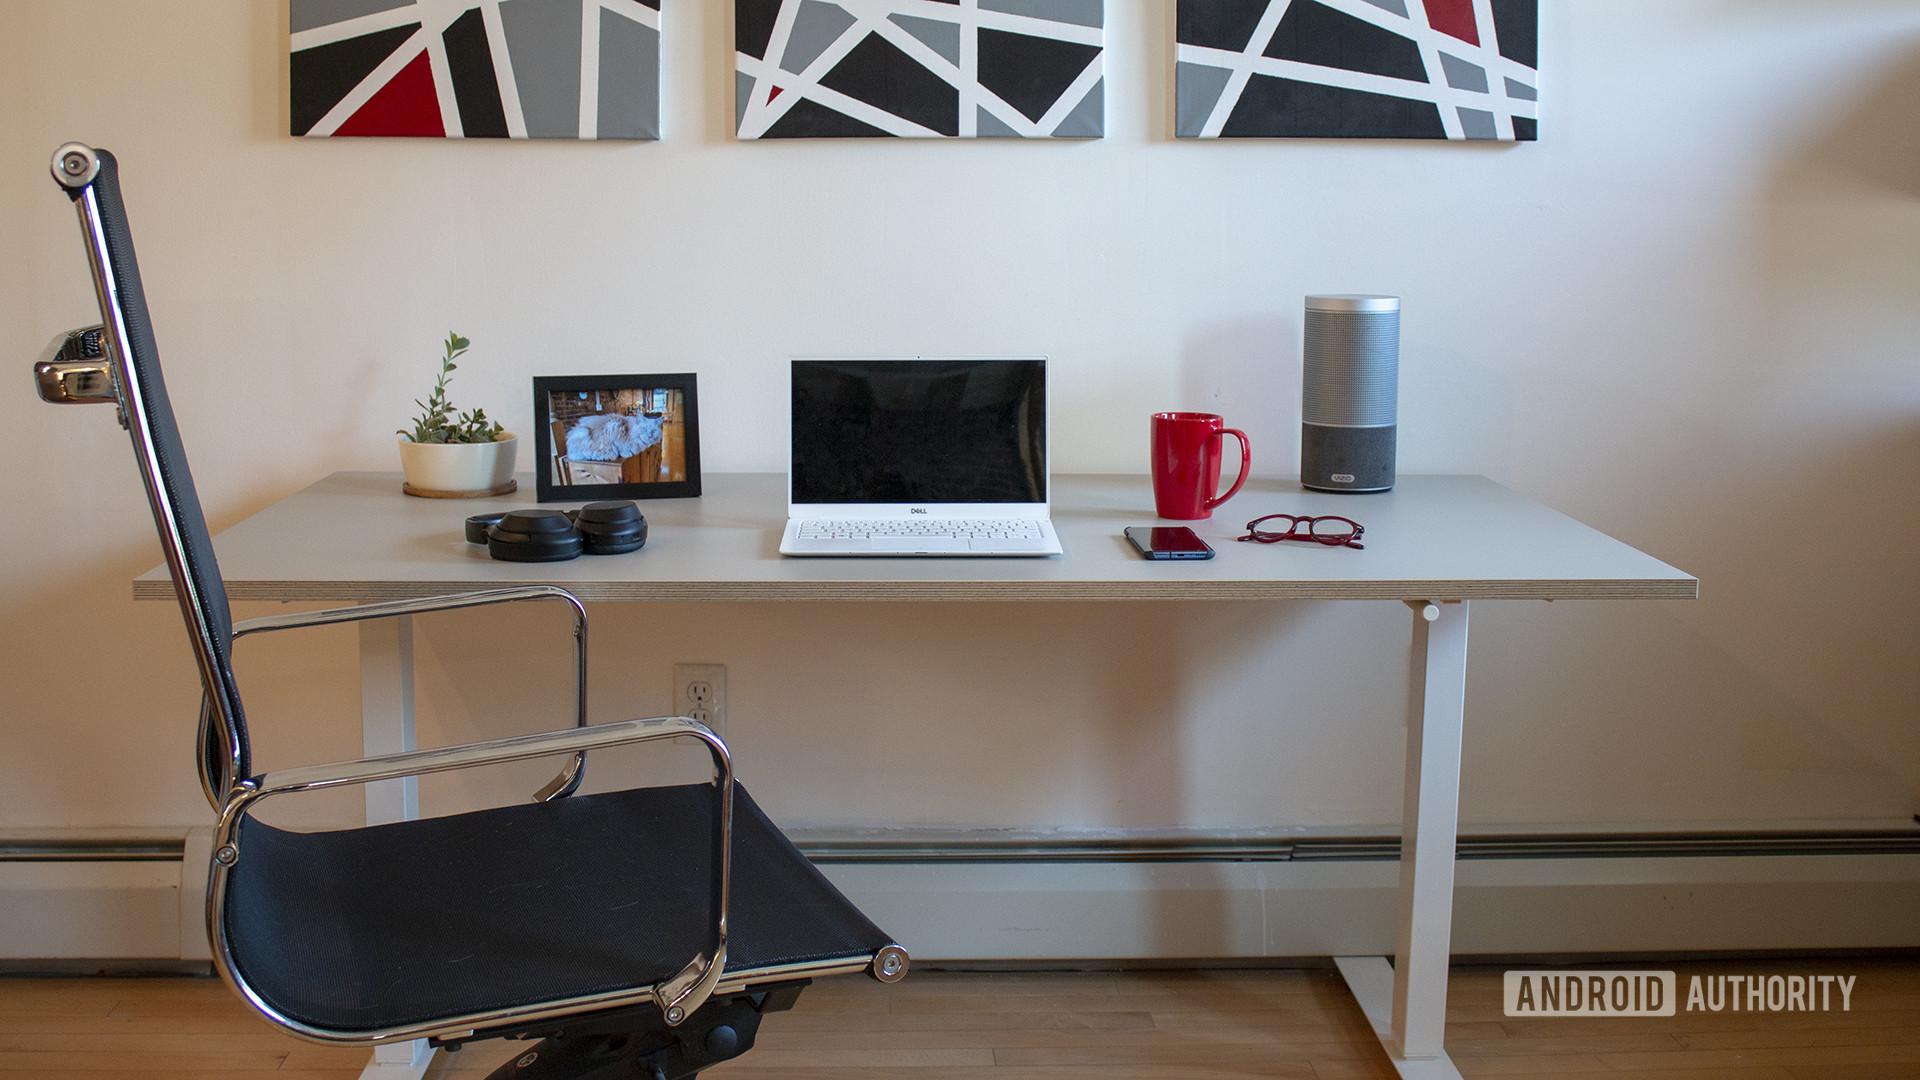 Ikea Skarsta Review The Most Basic Of, Does Ikea Have Desks